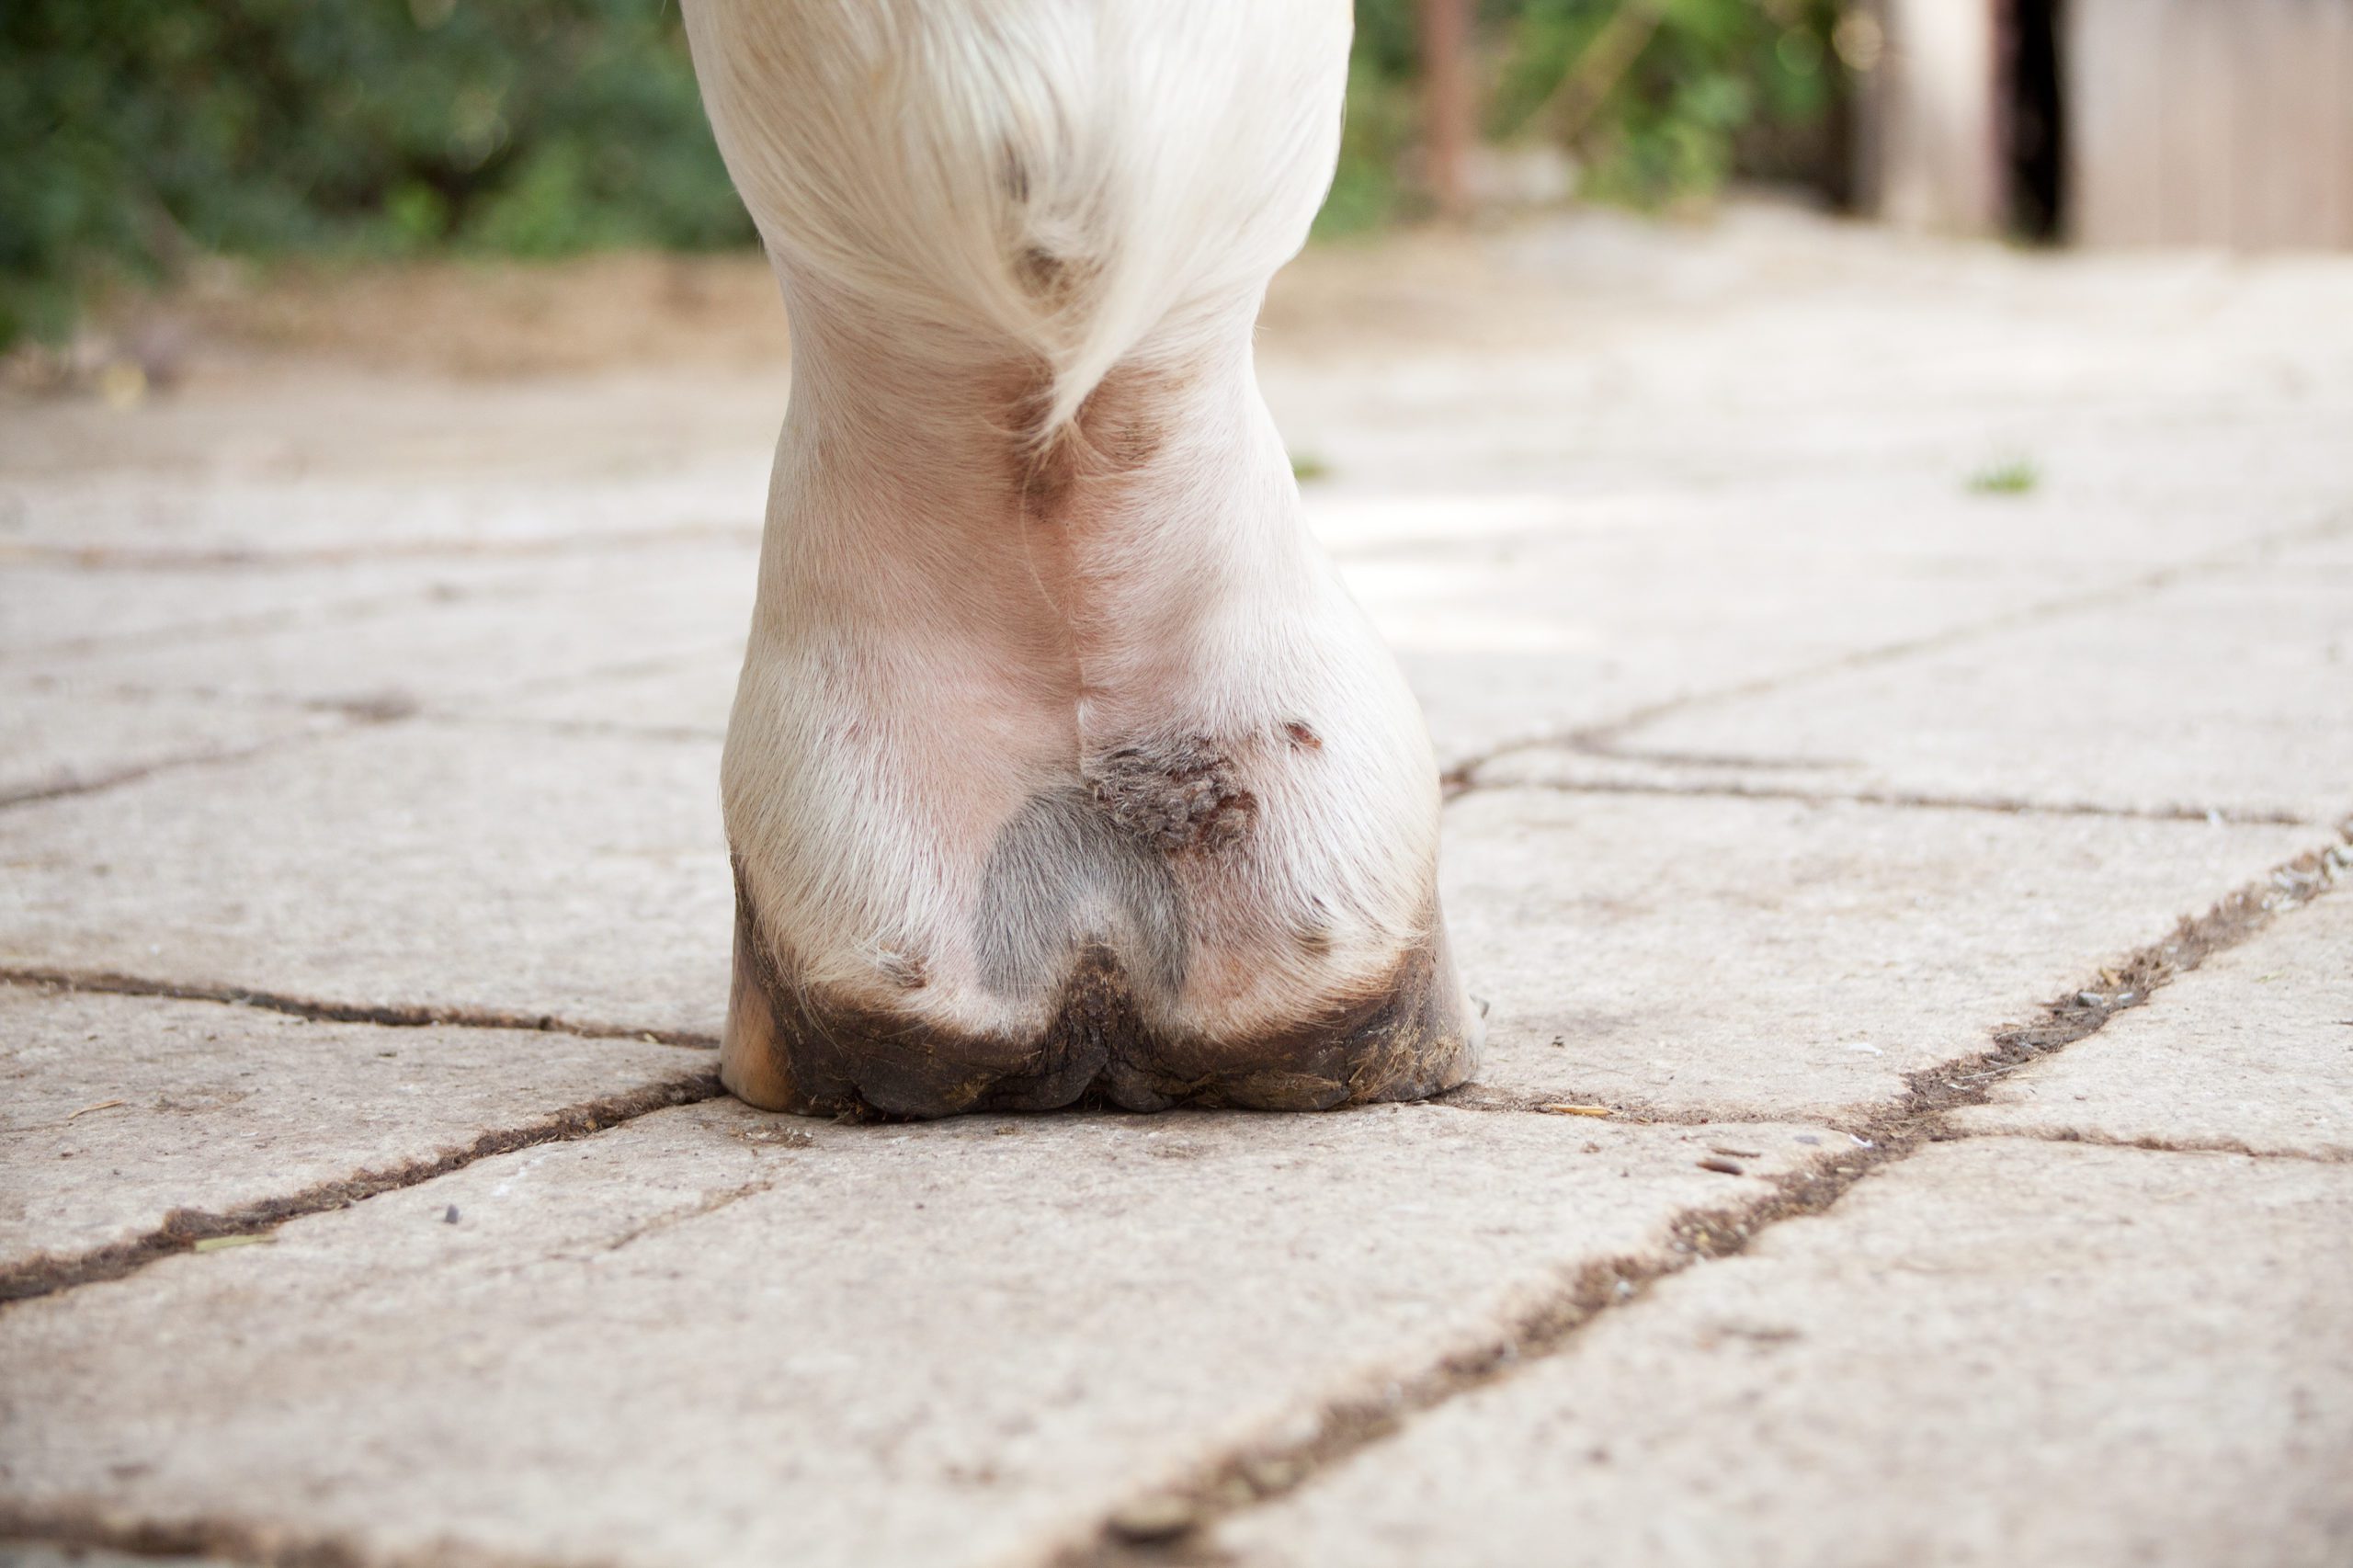 Rear view of a white pastern with scabs on it